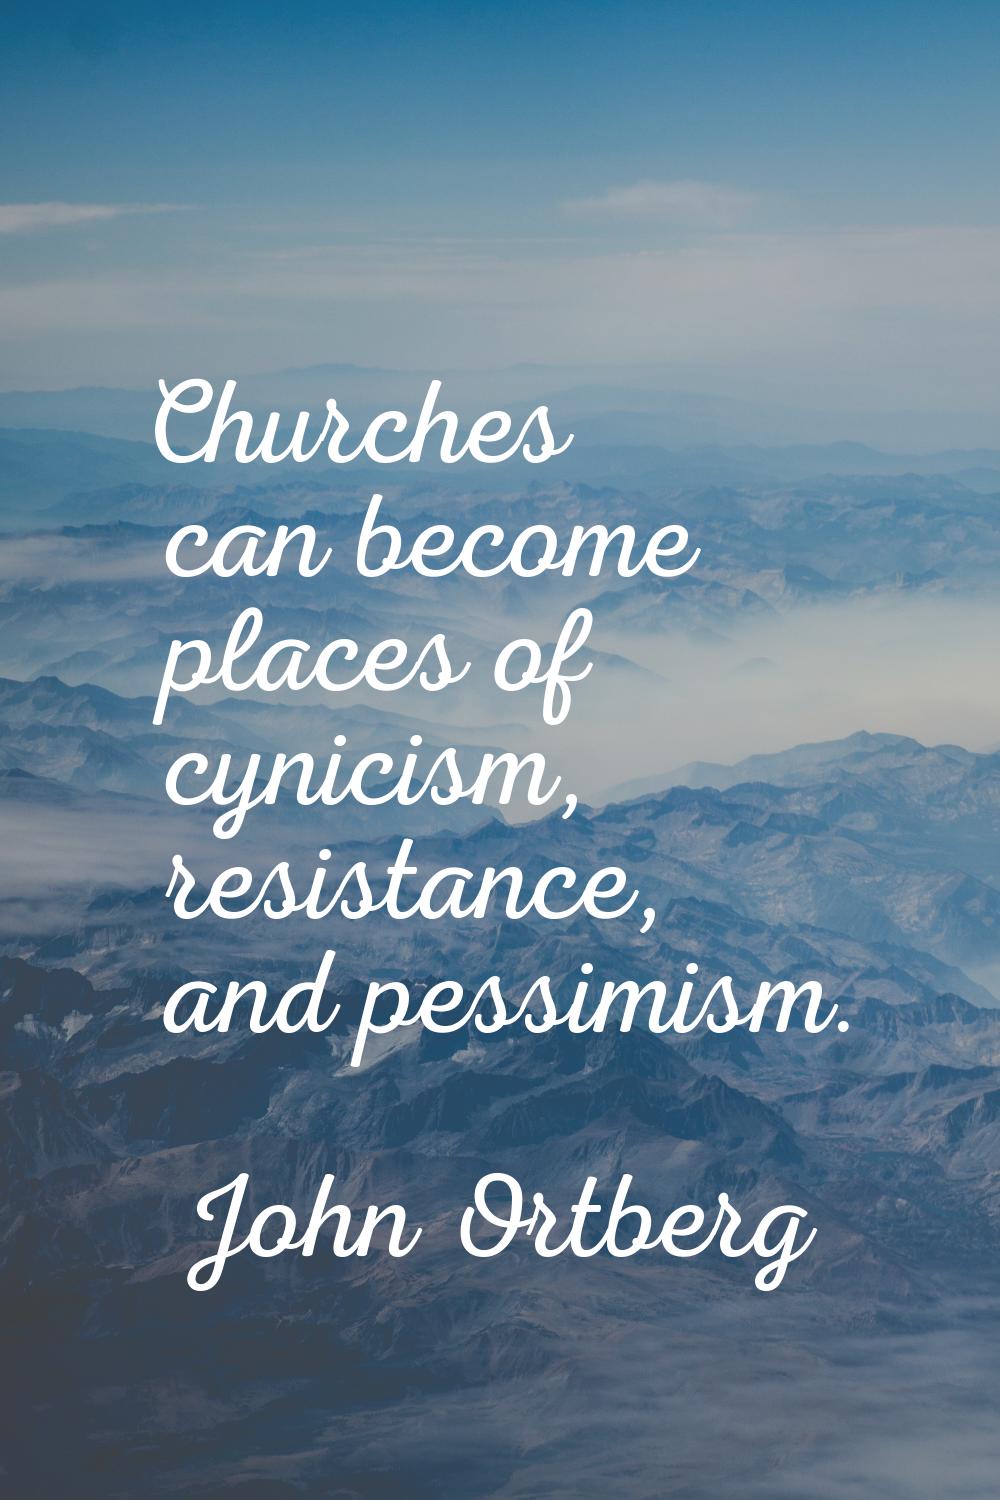 Churches can become places of cynicism, resistance, and pessimism.